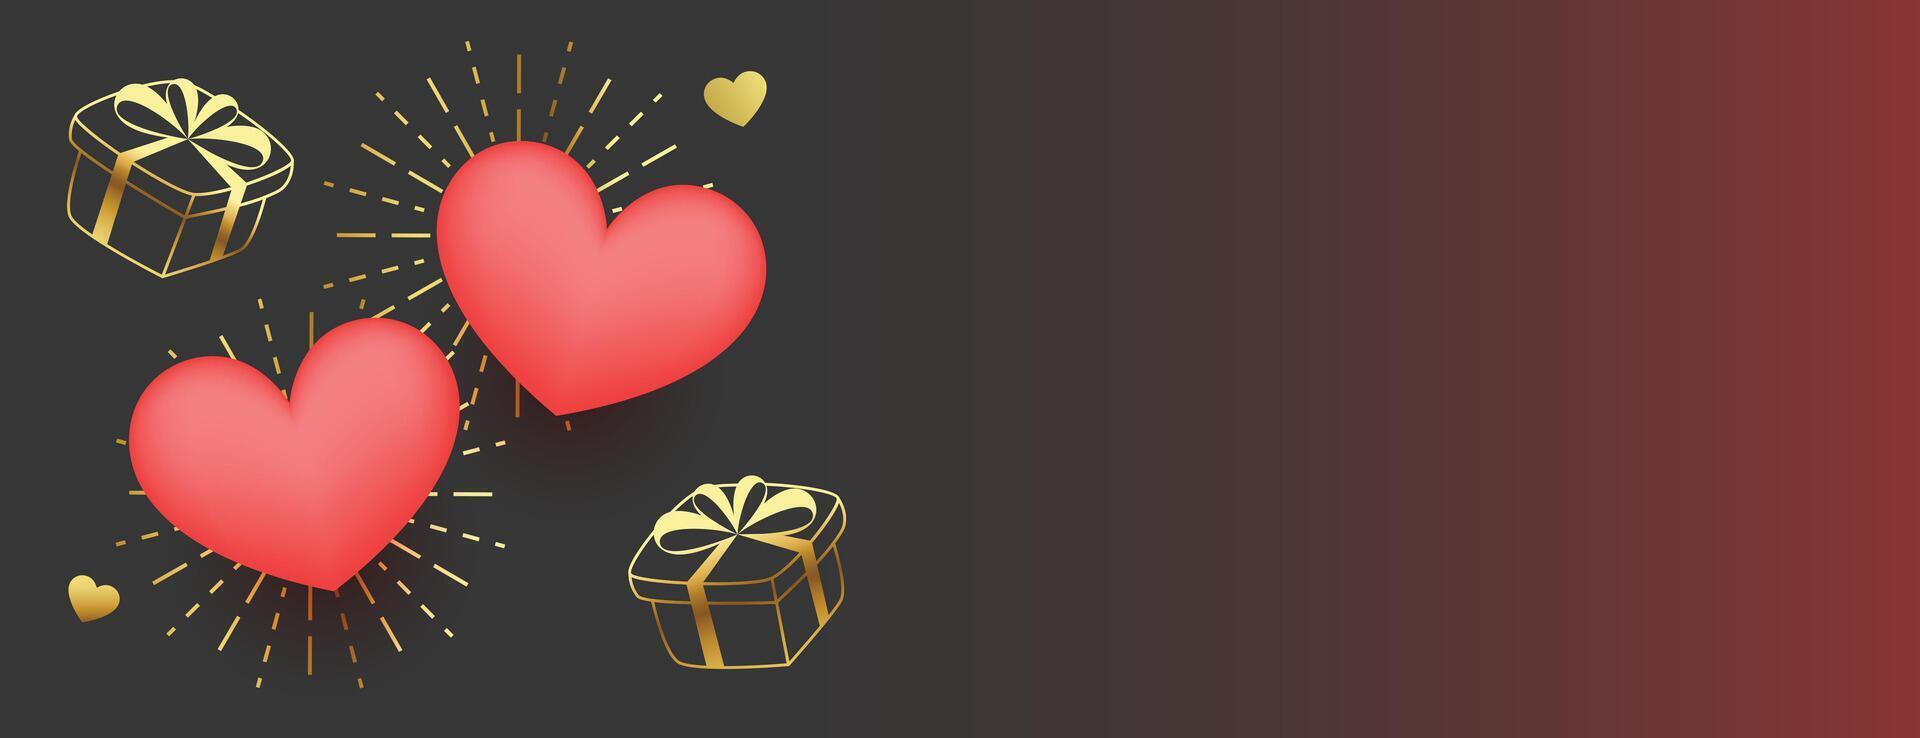 lovely valentines day greeting banner with 3d hearts and golden gift boxes vector